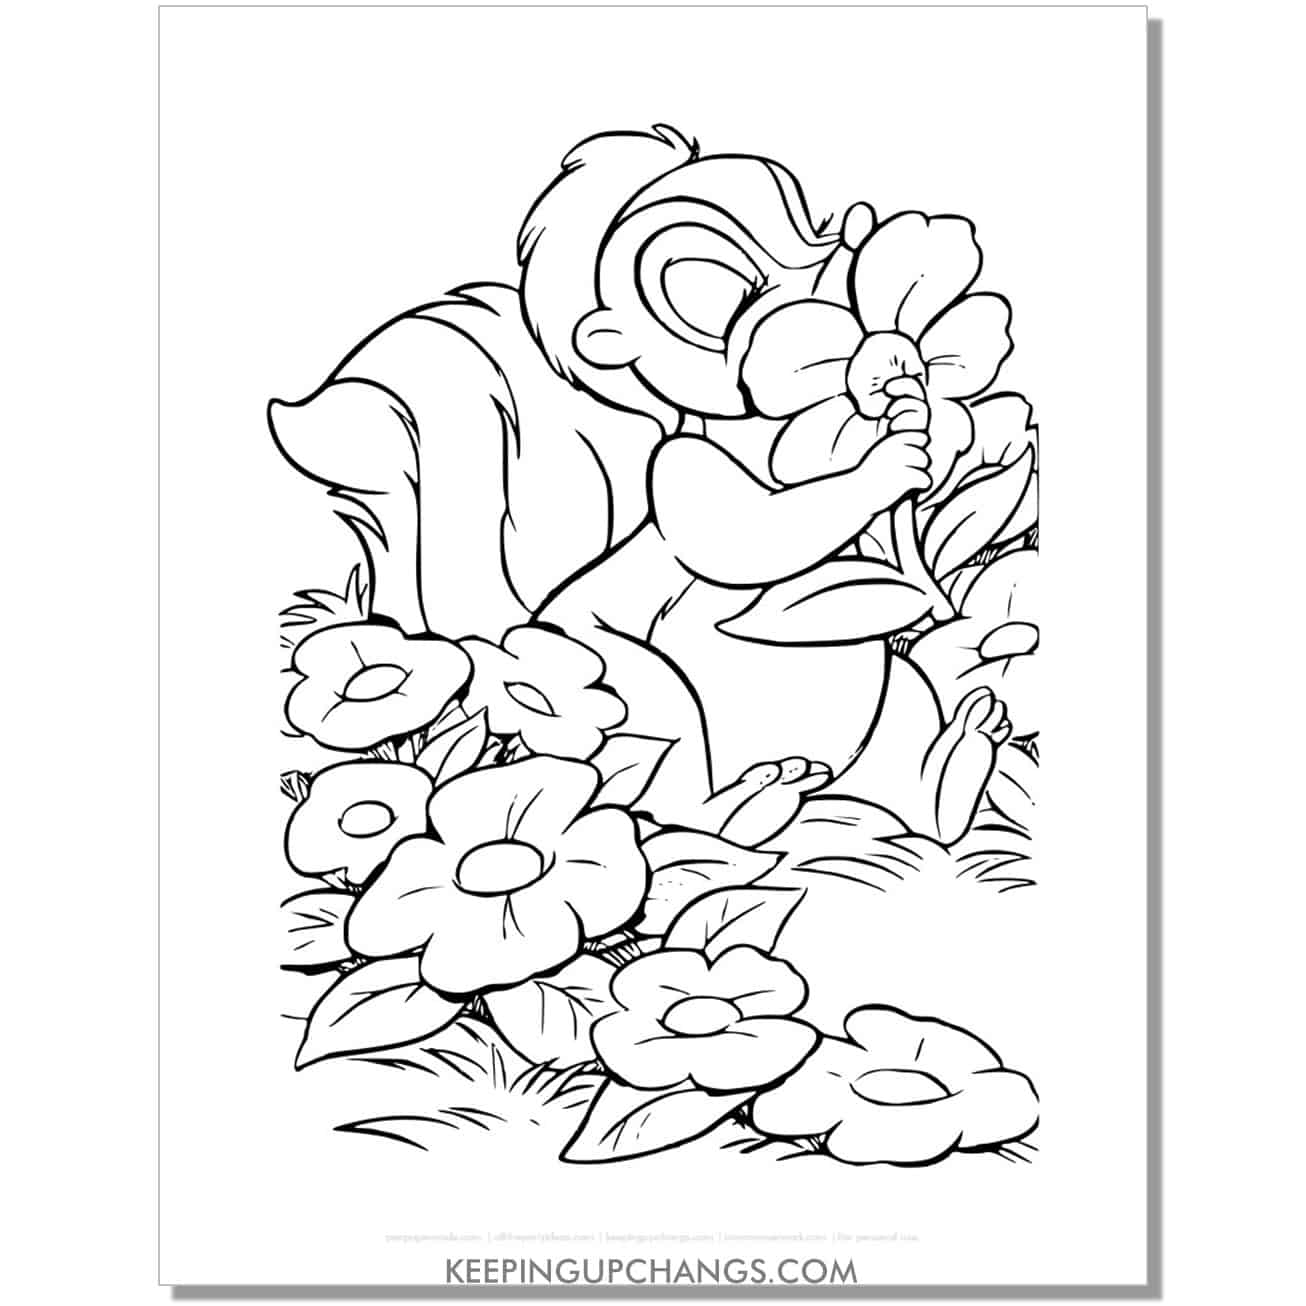 free flower the skunk bambi coloring page, sheet.